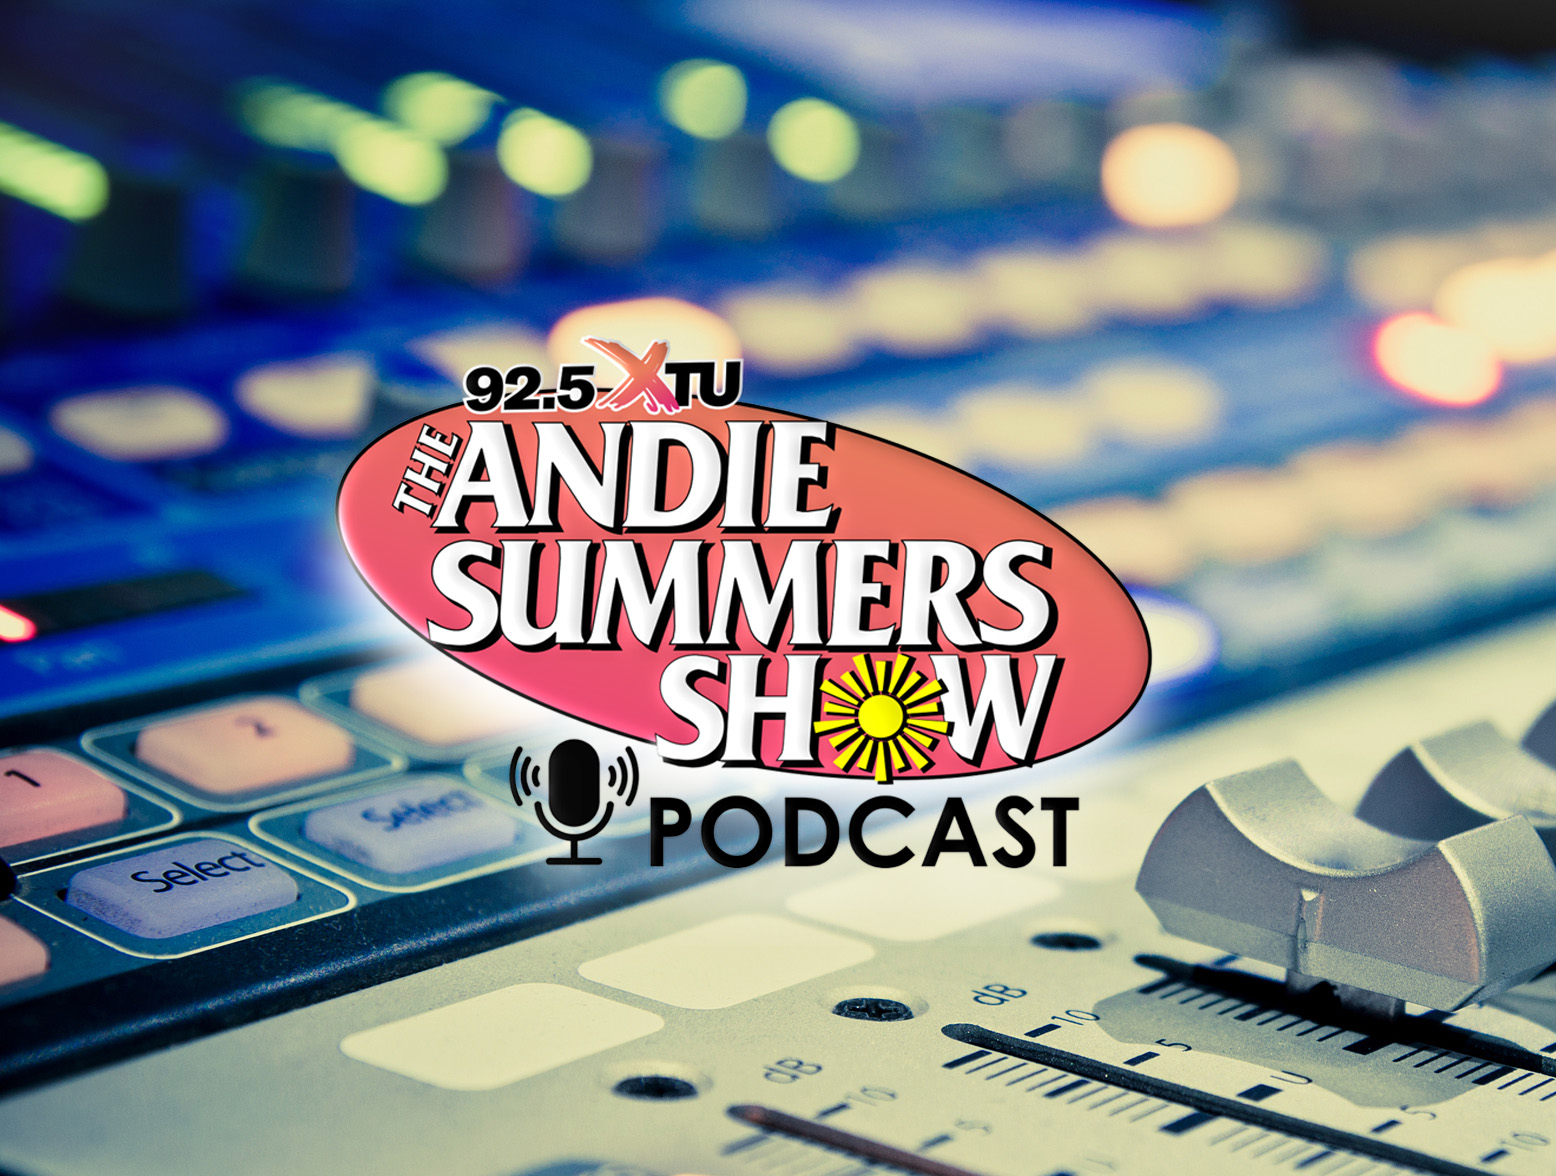 The Andie Summers Show Talks To Morgan, The Woman Who Took Shots With Nick Sirianni!